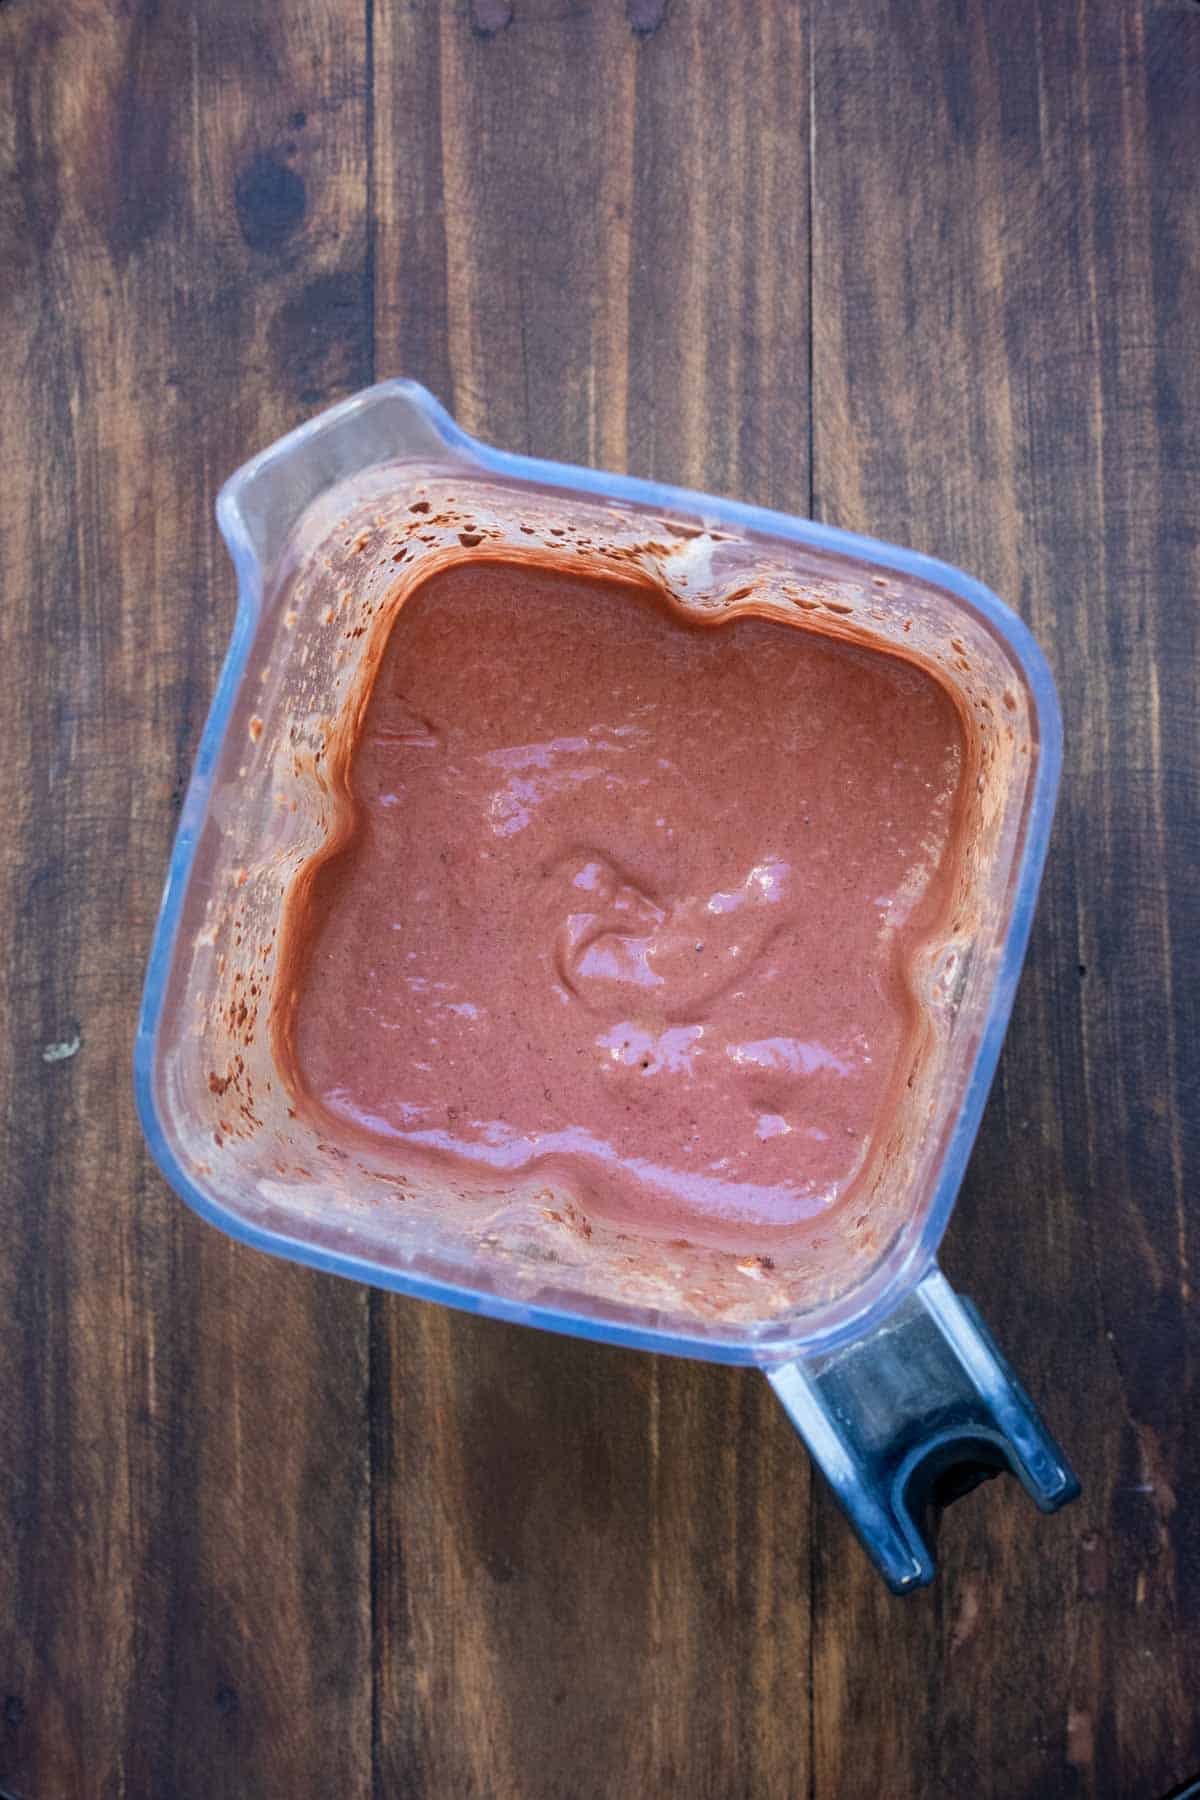 Top view of a blender filled with a chocolate strawberry smoothie